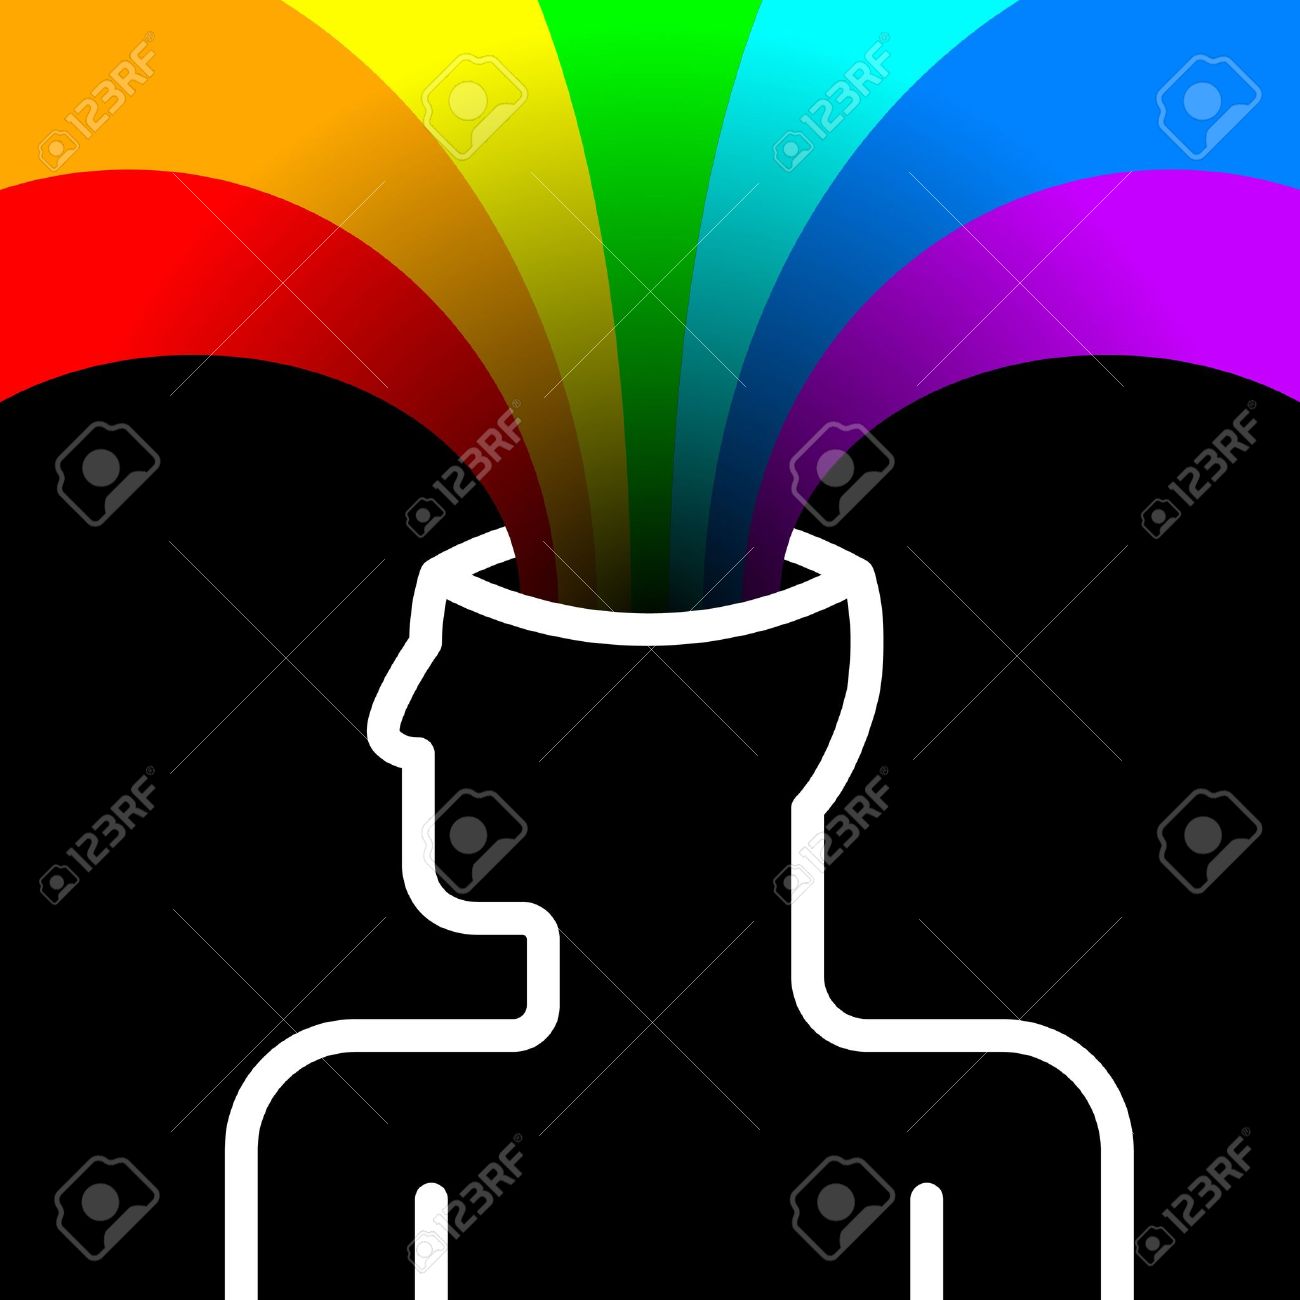 State Of Happiness With Rainbow Out Of Head Royalty Free Cliparts.